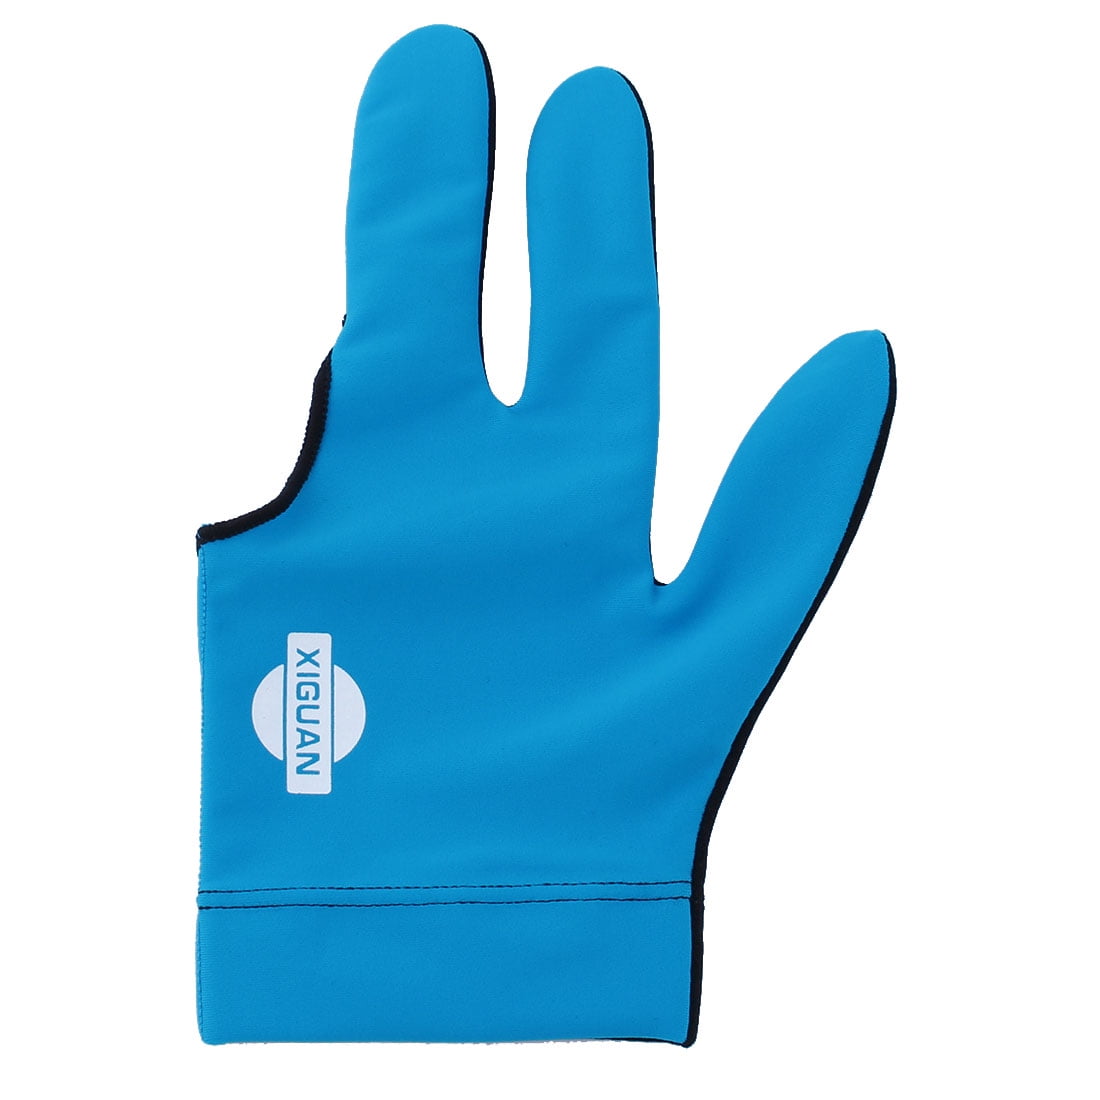 High Quality Blue Left Hand Billiards Gloves For Pool Cues 